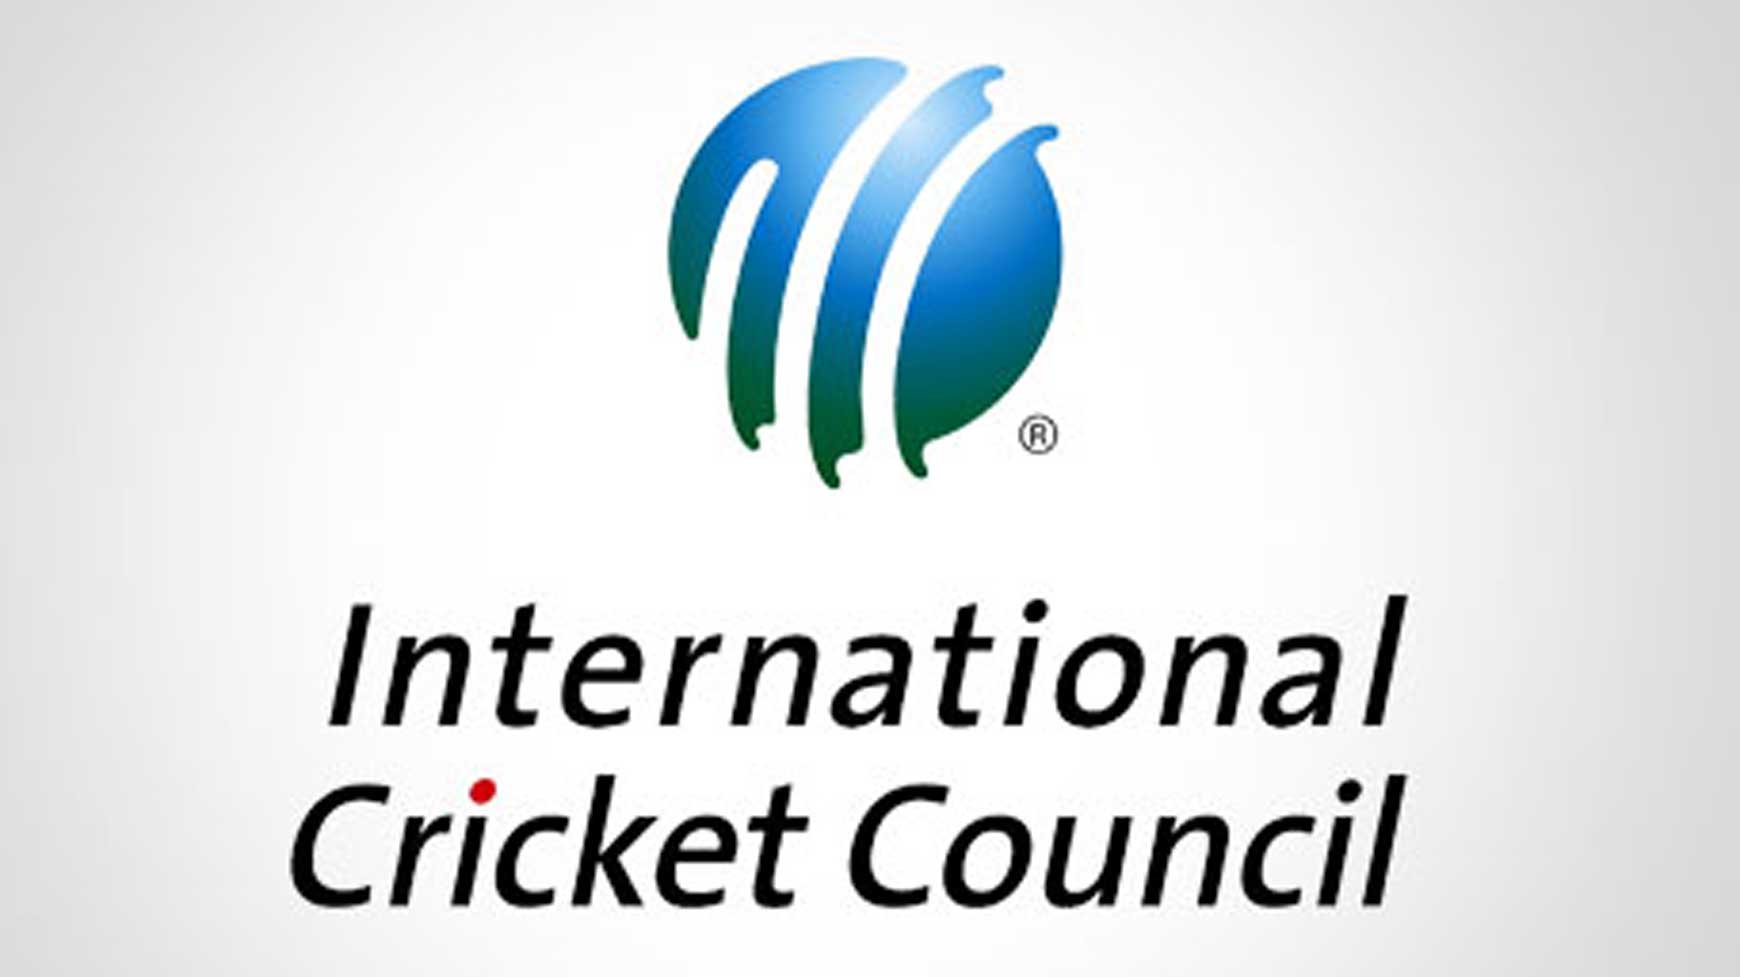 Three Nepali cricketers included in ICC T-20 rankings